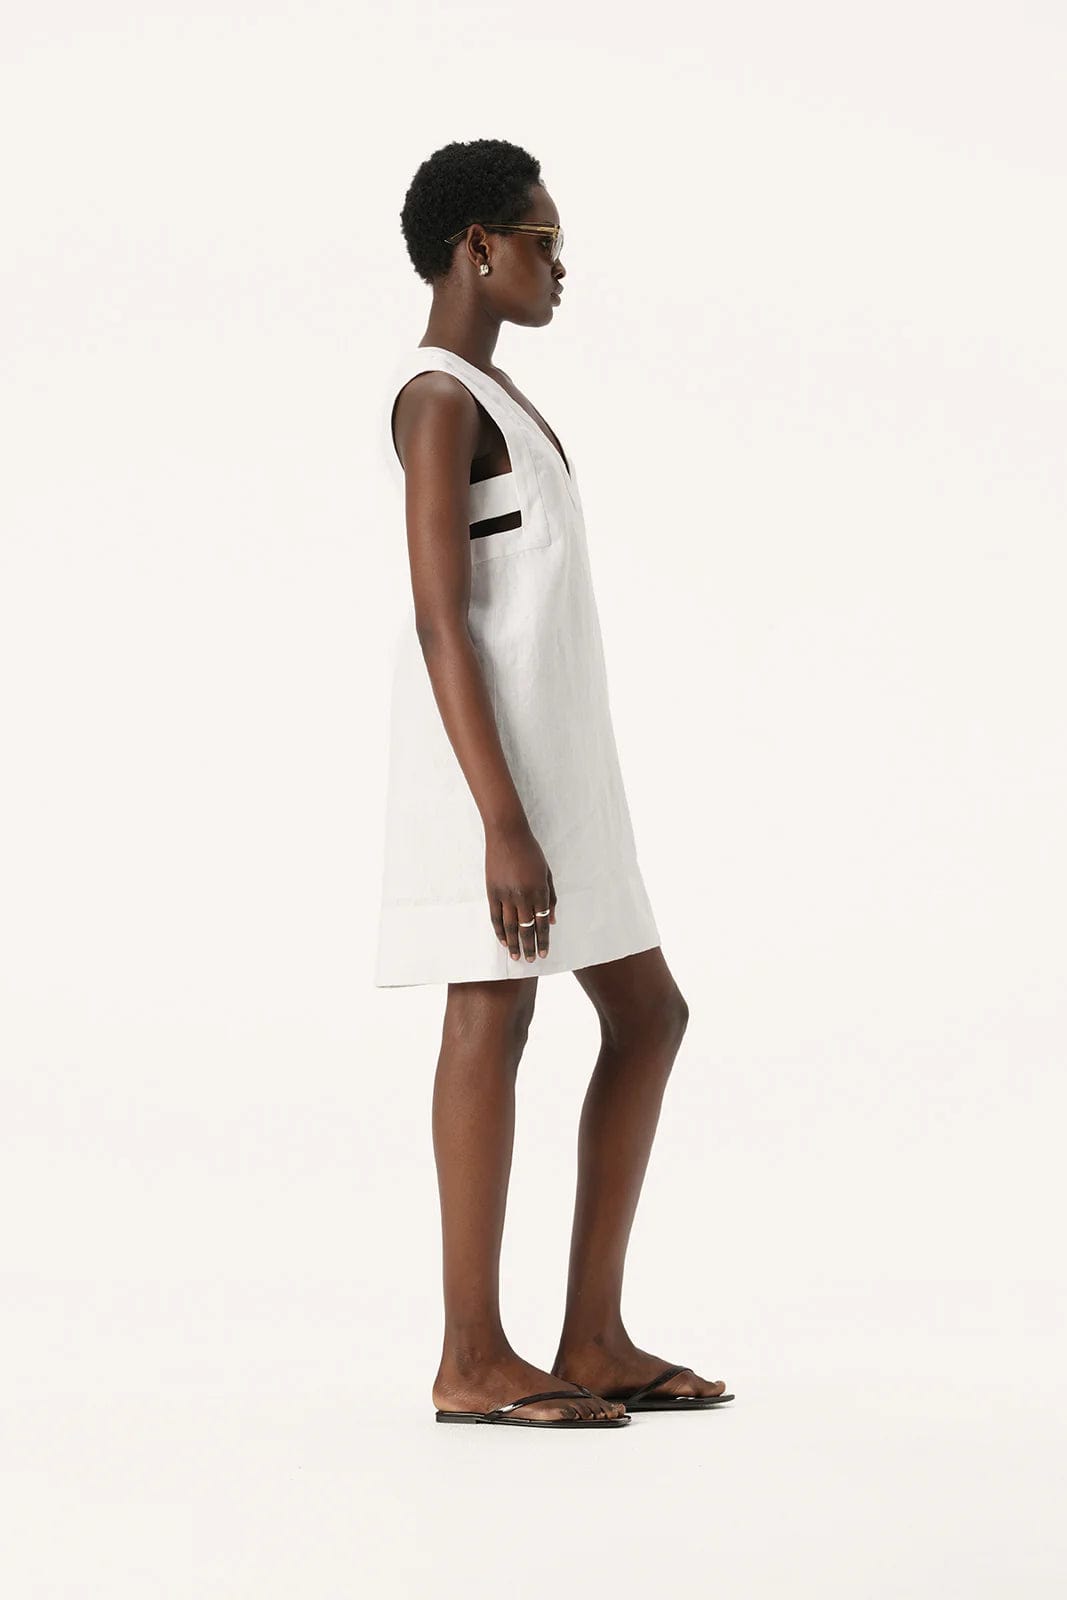 Elka Collective Dresses - Casual Elka Collective | Eze Dress - White